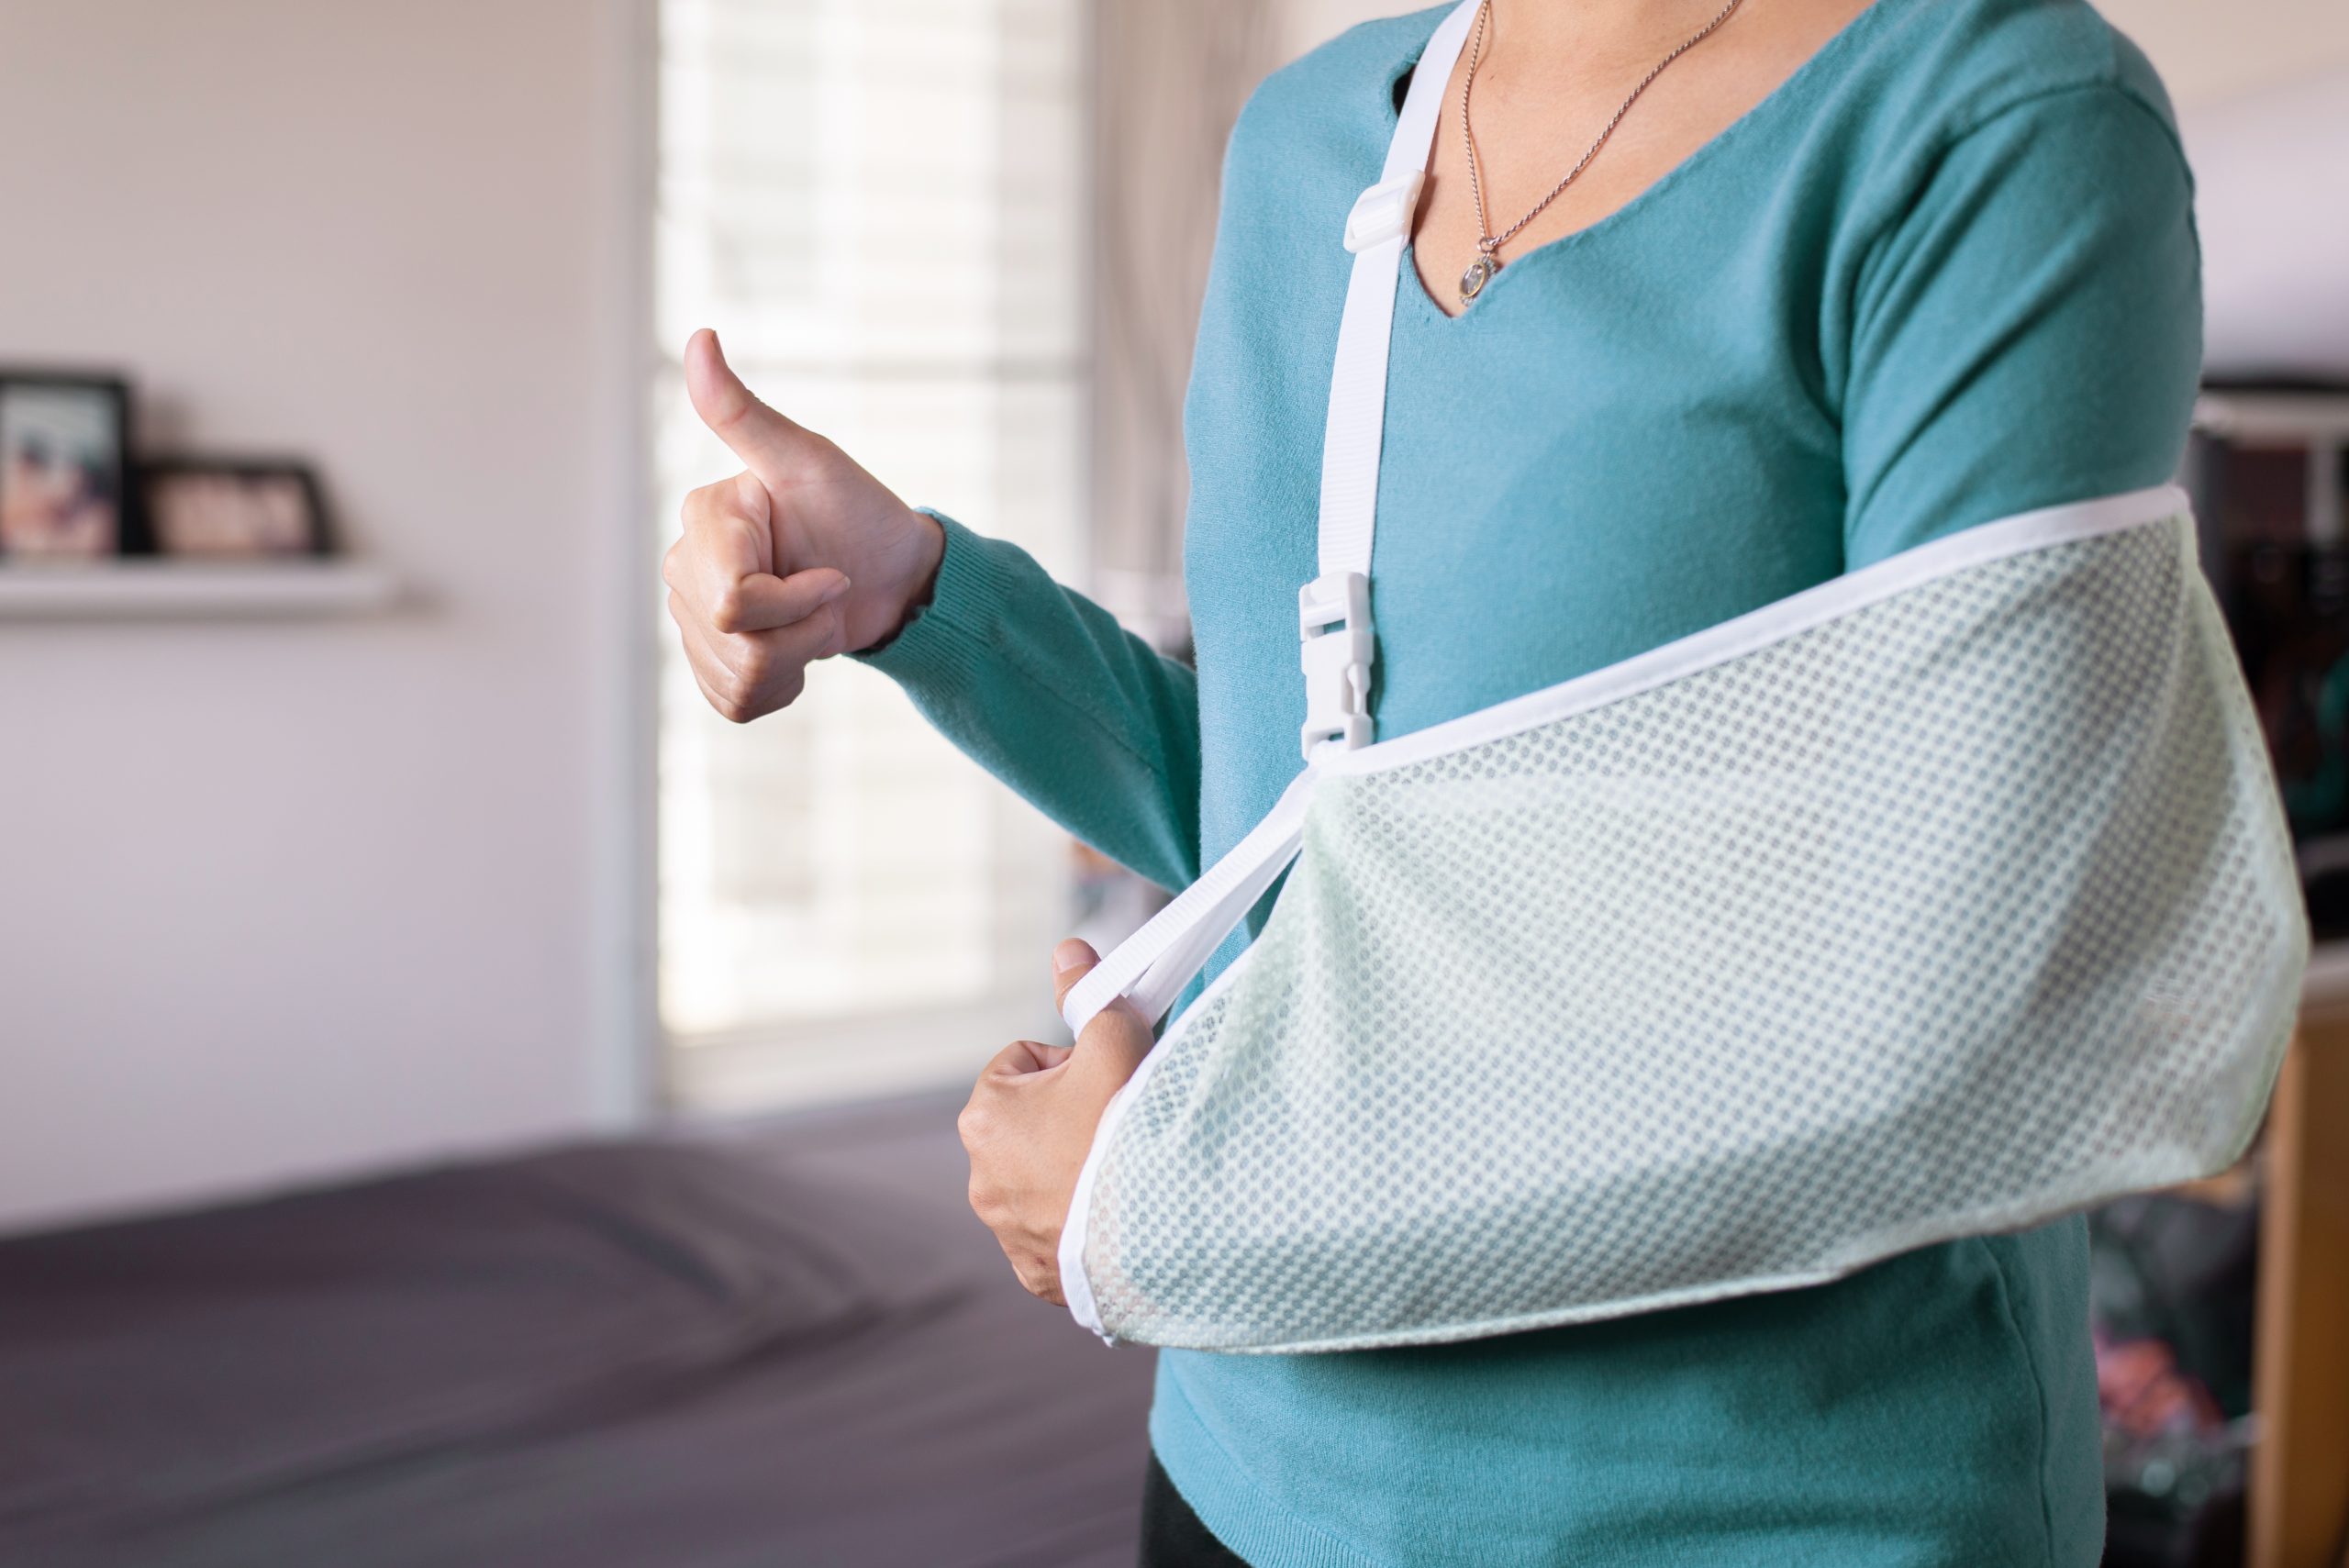 How to Treat a Bone Fracture